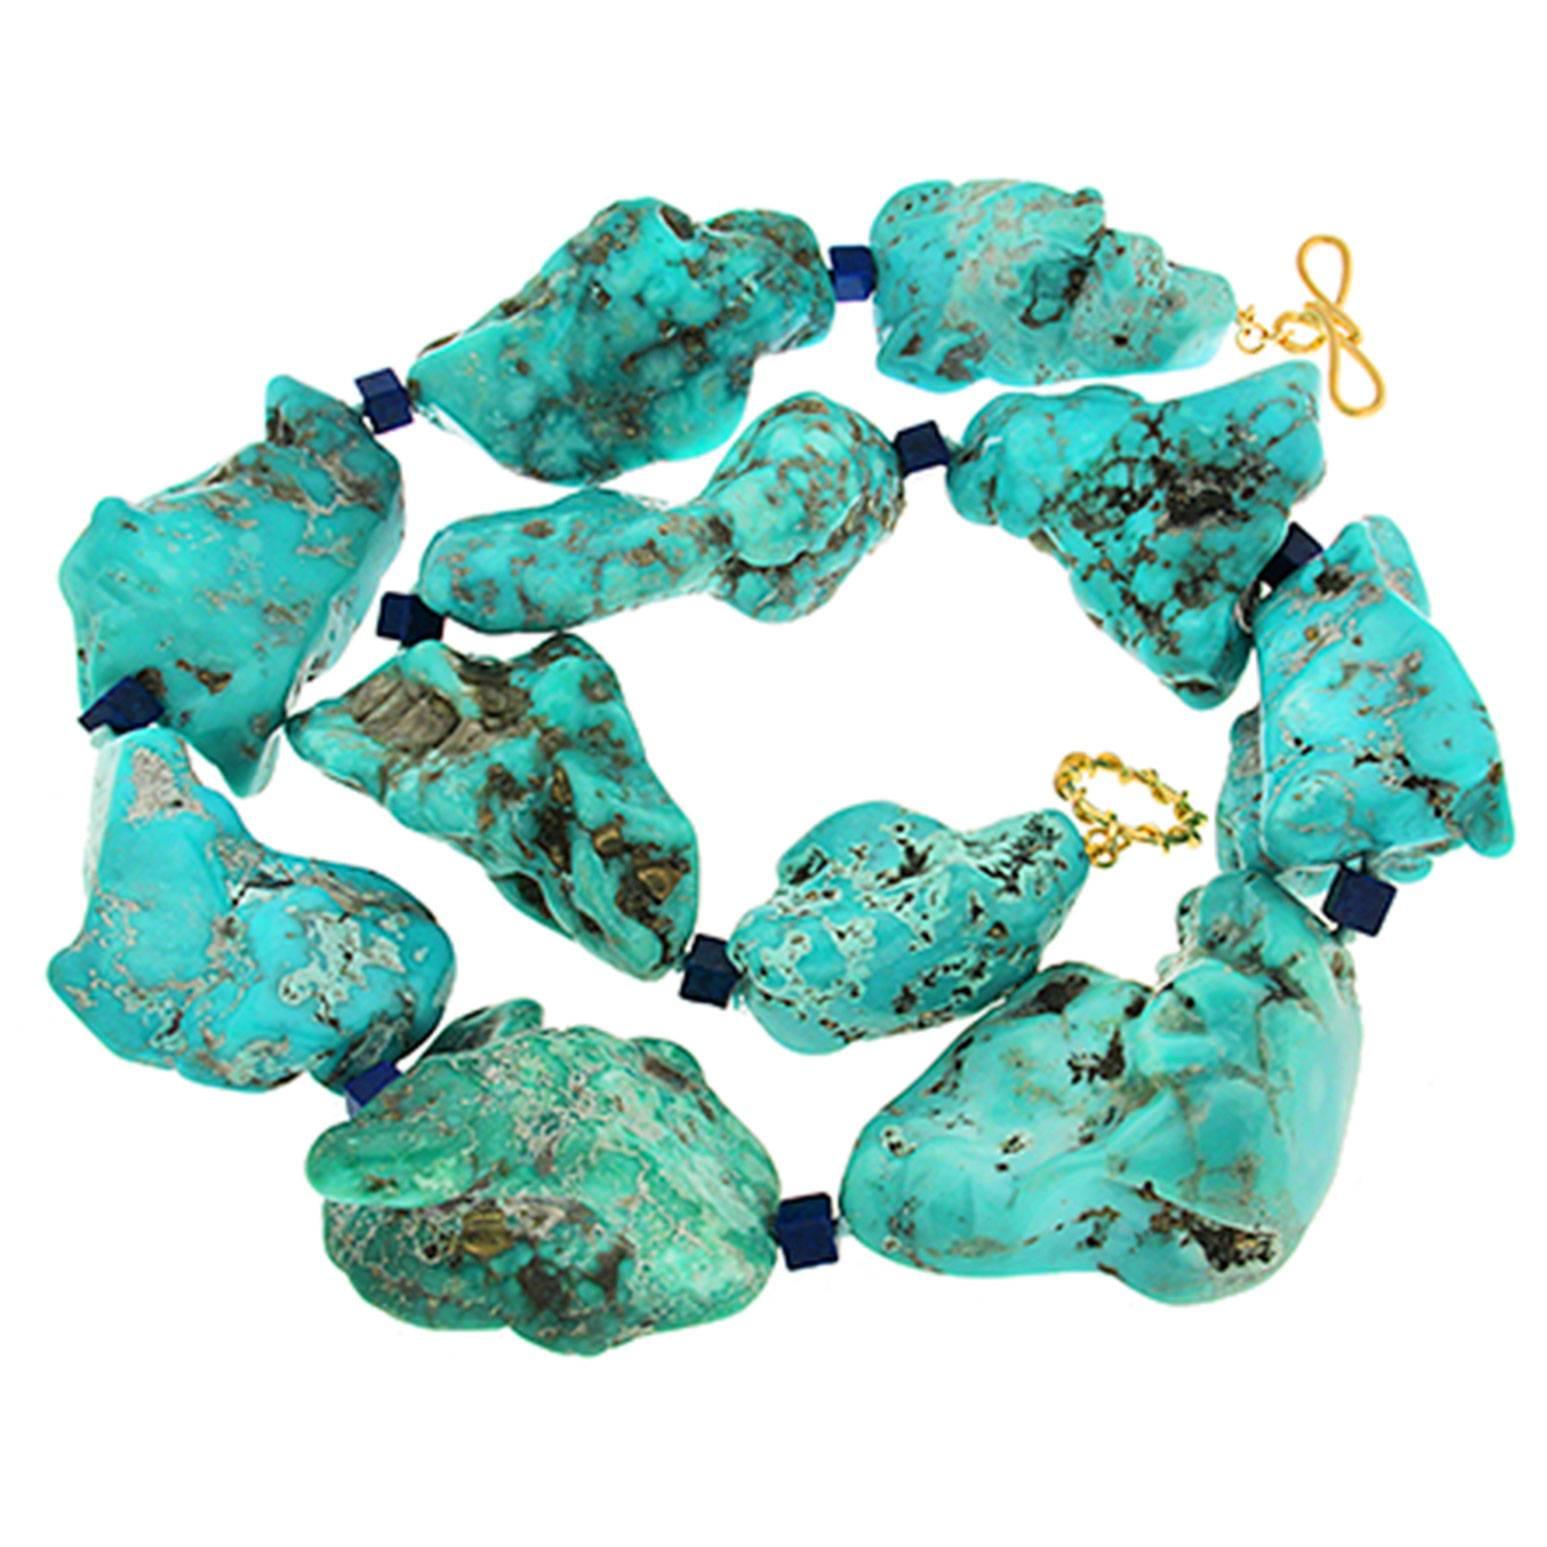 Valentin Magro Large Turquoise Nuggets and Lapis Lazuli Cubes Statement Necklace